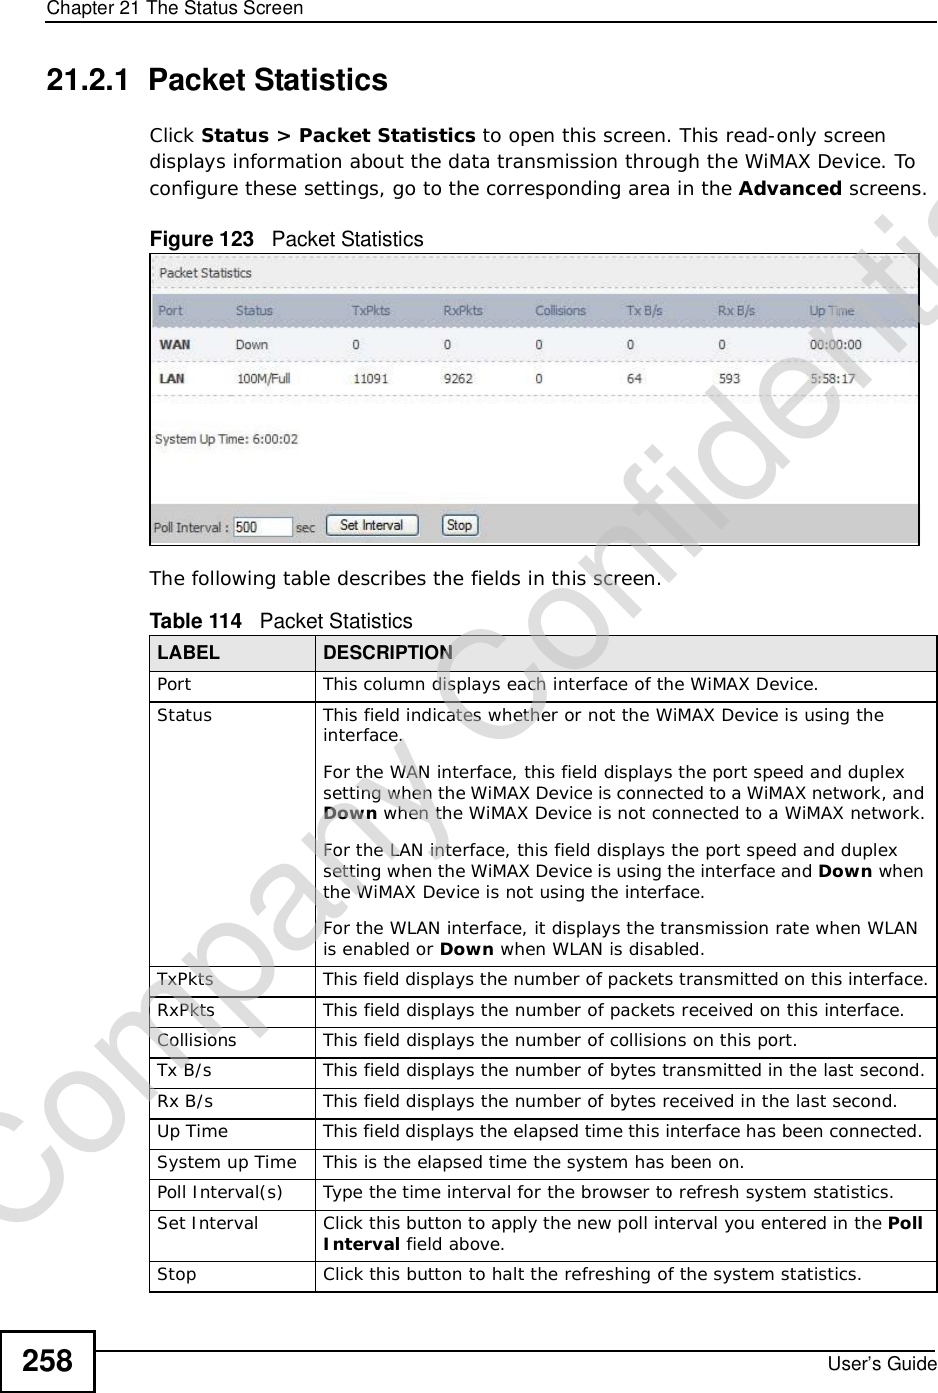 Chapter 21The Status ScreenUser’s Guide25821.2.1  Packet StatisticsClick Status &gt; Packet Statistics to open this screen. This read-only screen displays information about the data transmission through the WiMAX Device. To configure these settings, go to the corresponding area in the Advanced screens.Figure 123   Packet StatisticsThe following table describes the fields in this screen.  Table 114   Packet StatisticsLABEL DESCRIPTIONPortThis column displays each interface of the WiMAX Device.Status This field indicates whether or not the WiMAX Device is using the interface.For the WAN interface, this field displays the port speed and duplex setting when the WiMAX Device is connected to a WiMAX network, and Down when the WiMAX Device is not connected to a WiMAX network.For the LAN interface, this field displays the port speed and duplex setting when the WiMAX Device is using the interface and Down when the WiMAX Device is not using the interface.For the WLAN interface, it displays the transmission rate when WLAN is enabled or Down when WLAN is disabled.TxPkts  This field displays the number of packets transmitted on this interface.RxPkts  This field displays the number of packets received on this interface.Collisions This field displays the number of collisions on this port.Tx B/s  This field displays the number of bytes transmitted in the last second.Rx B/s This field displays the number of bytes received in the last second.Up Time  This field displays the elapsed time this interface has been connected. System up Time This is the elapsed time the system has been on.Poll Interval(s) Type the time interval for the browser to refresh system statistics.Set Interval Click this button to apply the new poll interval you entered in the PollInterval field above.Stop Click this button to halt the refreshing of the system statistics.Company Confidential